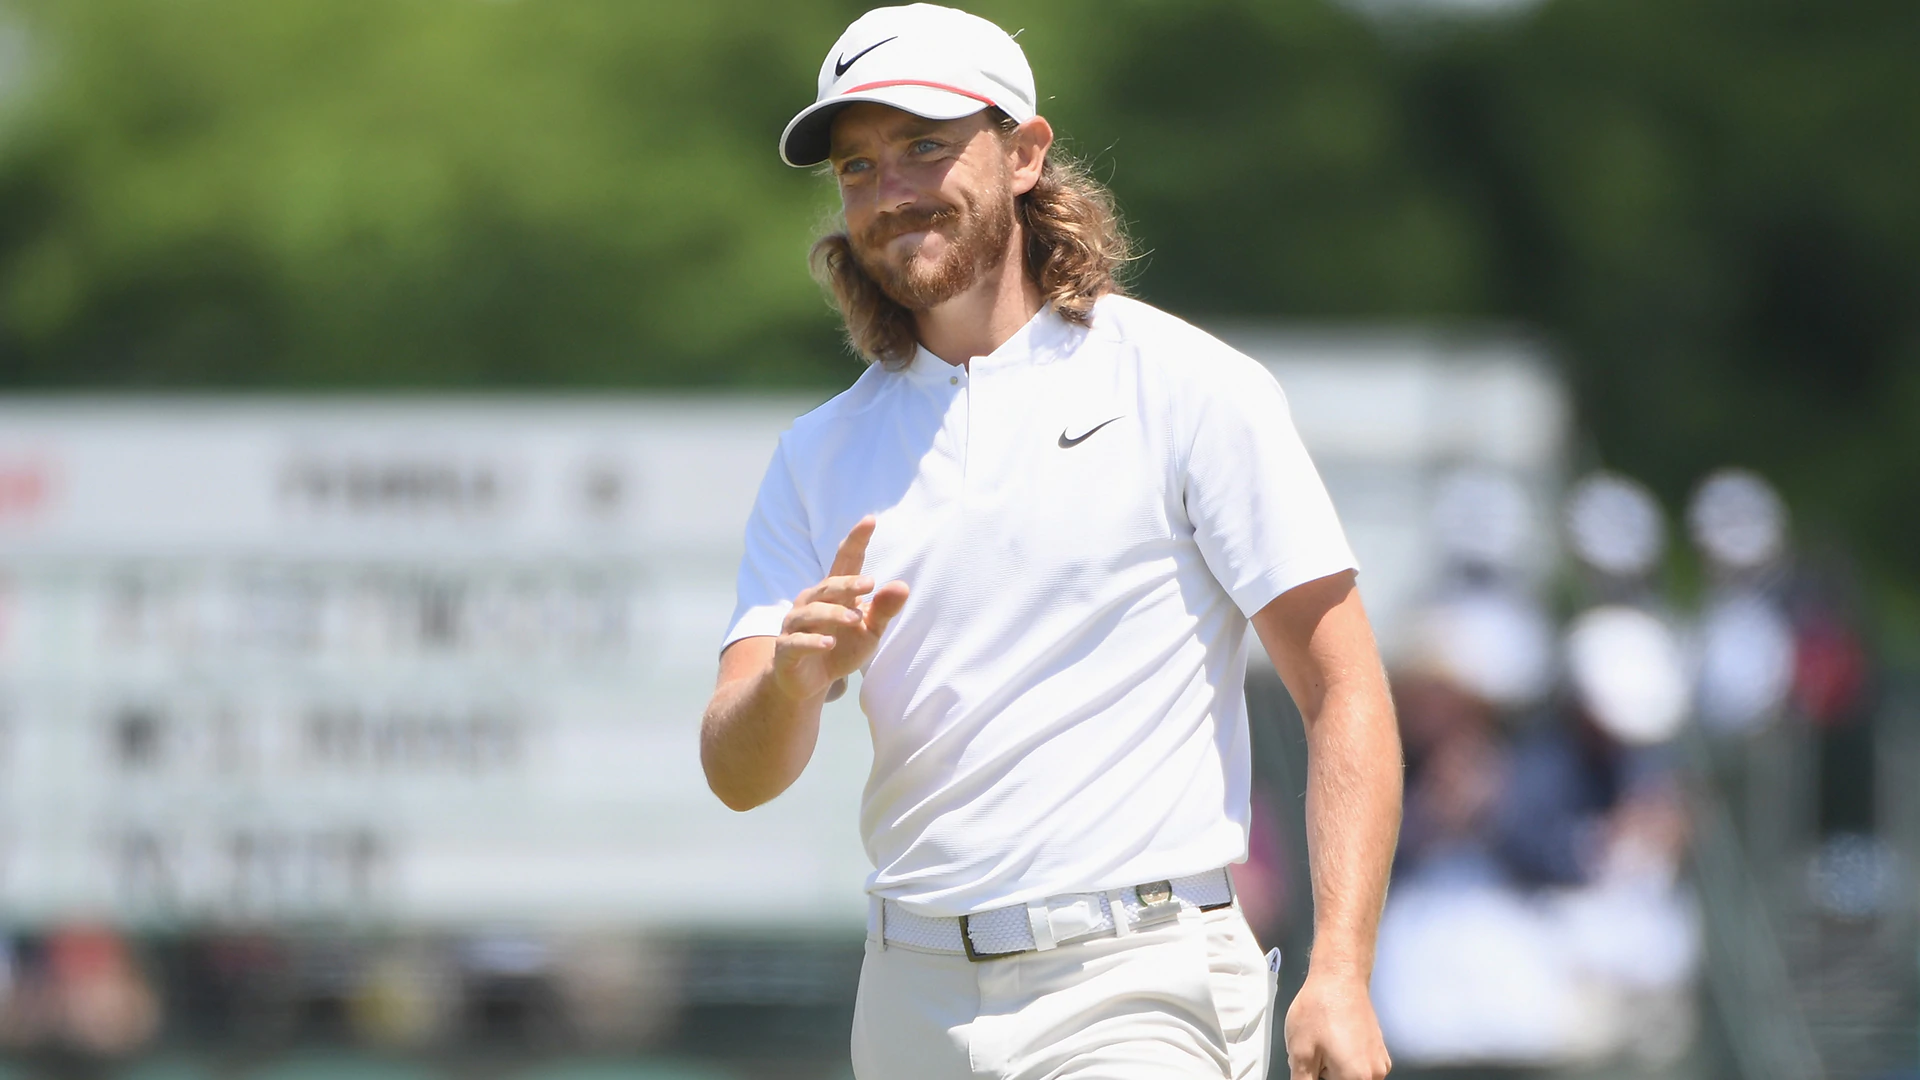 Fleetwood fires round of the week with 66